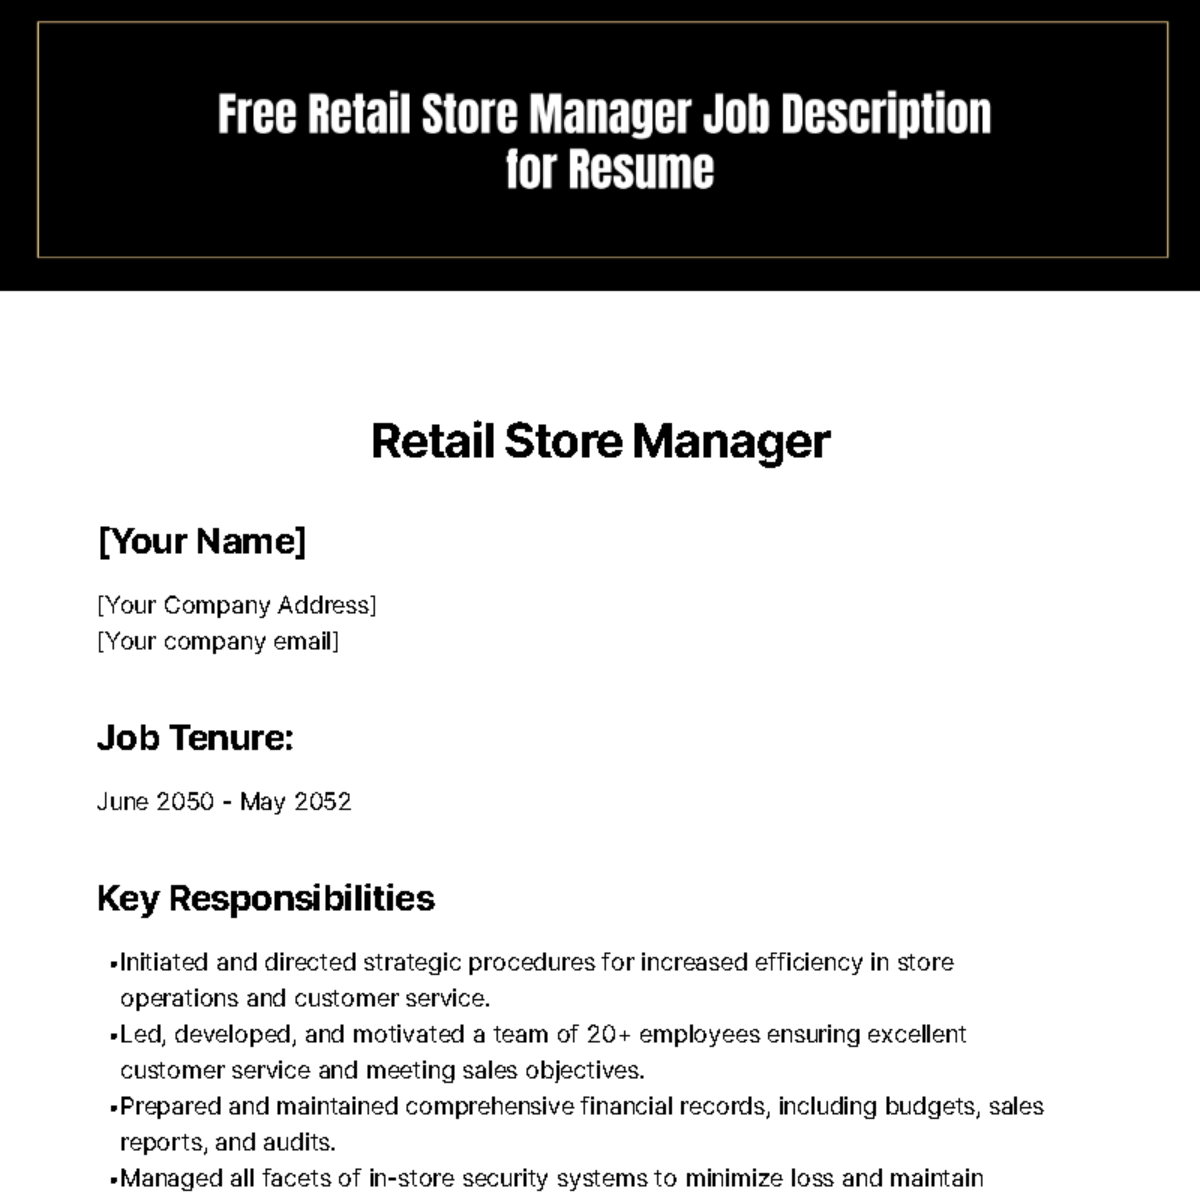 Retail Store Manager Job Description for Resume Template